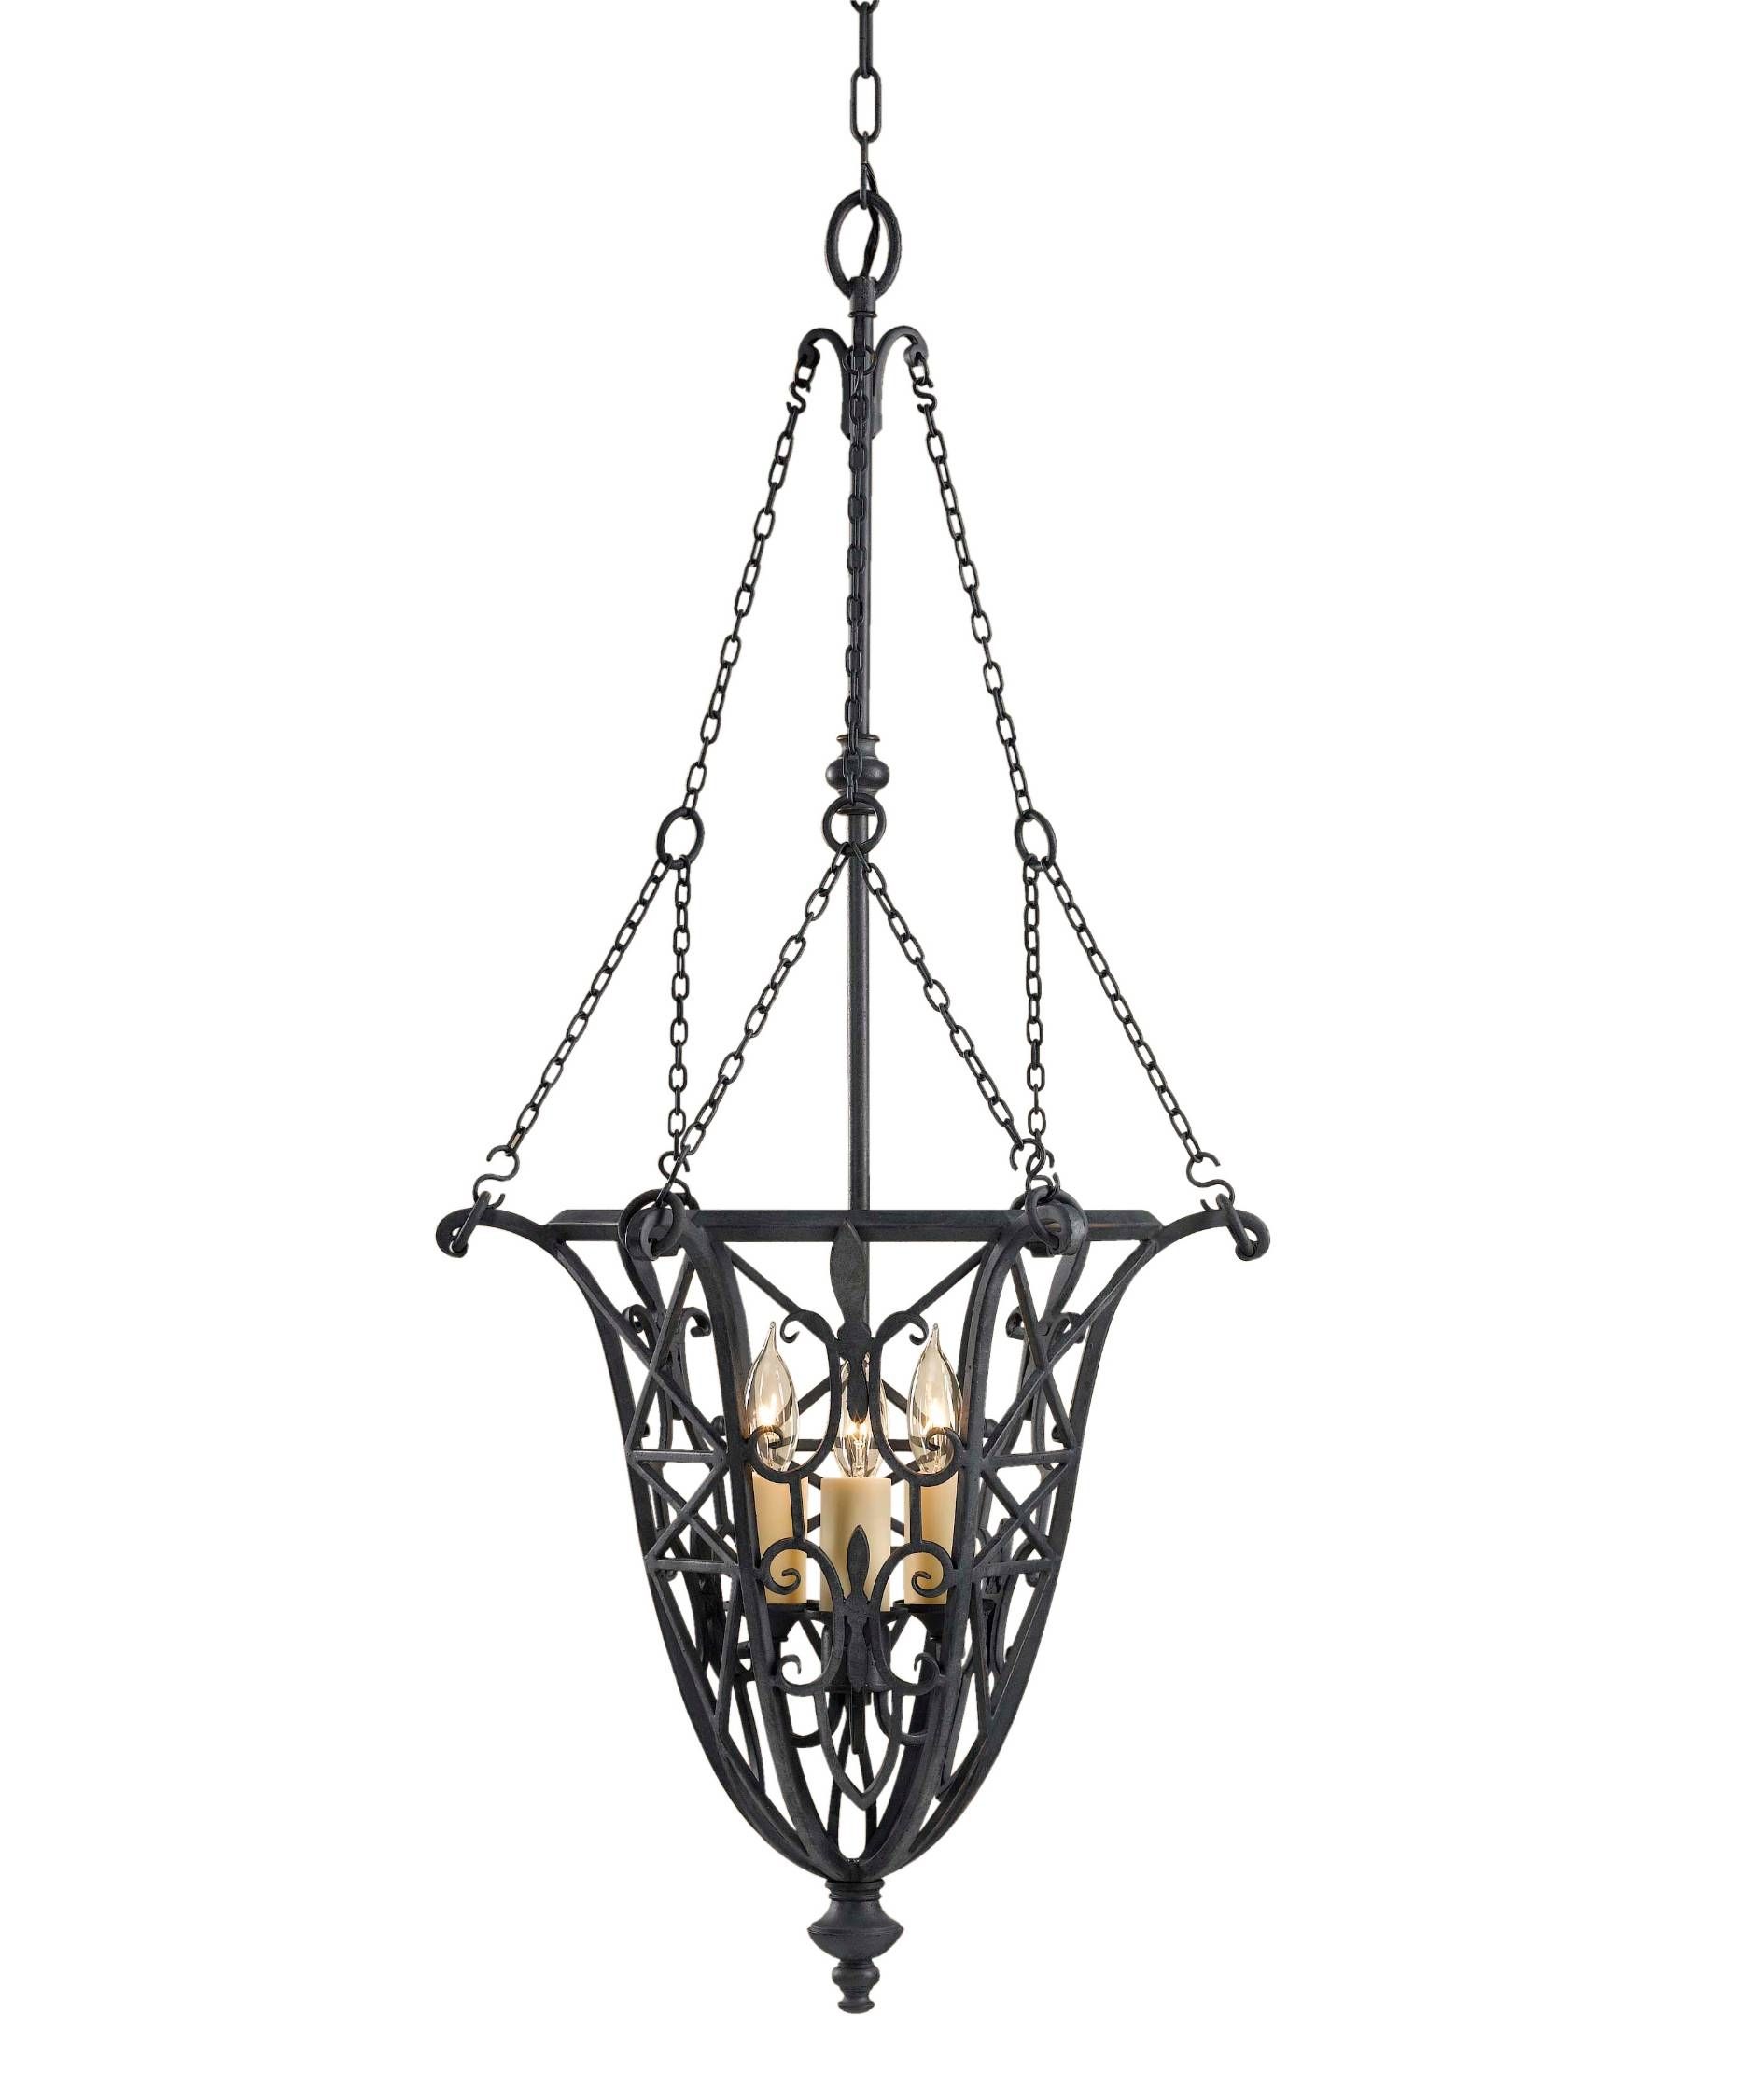 Amazing Of Wrought Iron Pendant Light Related To House Decor Within Wrought Iron Kitchen Lights Fixtures (View 15 of 15)